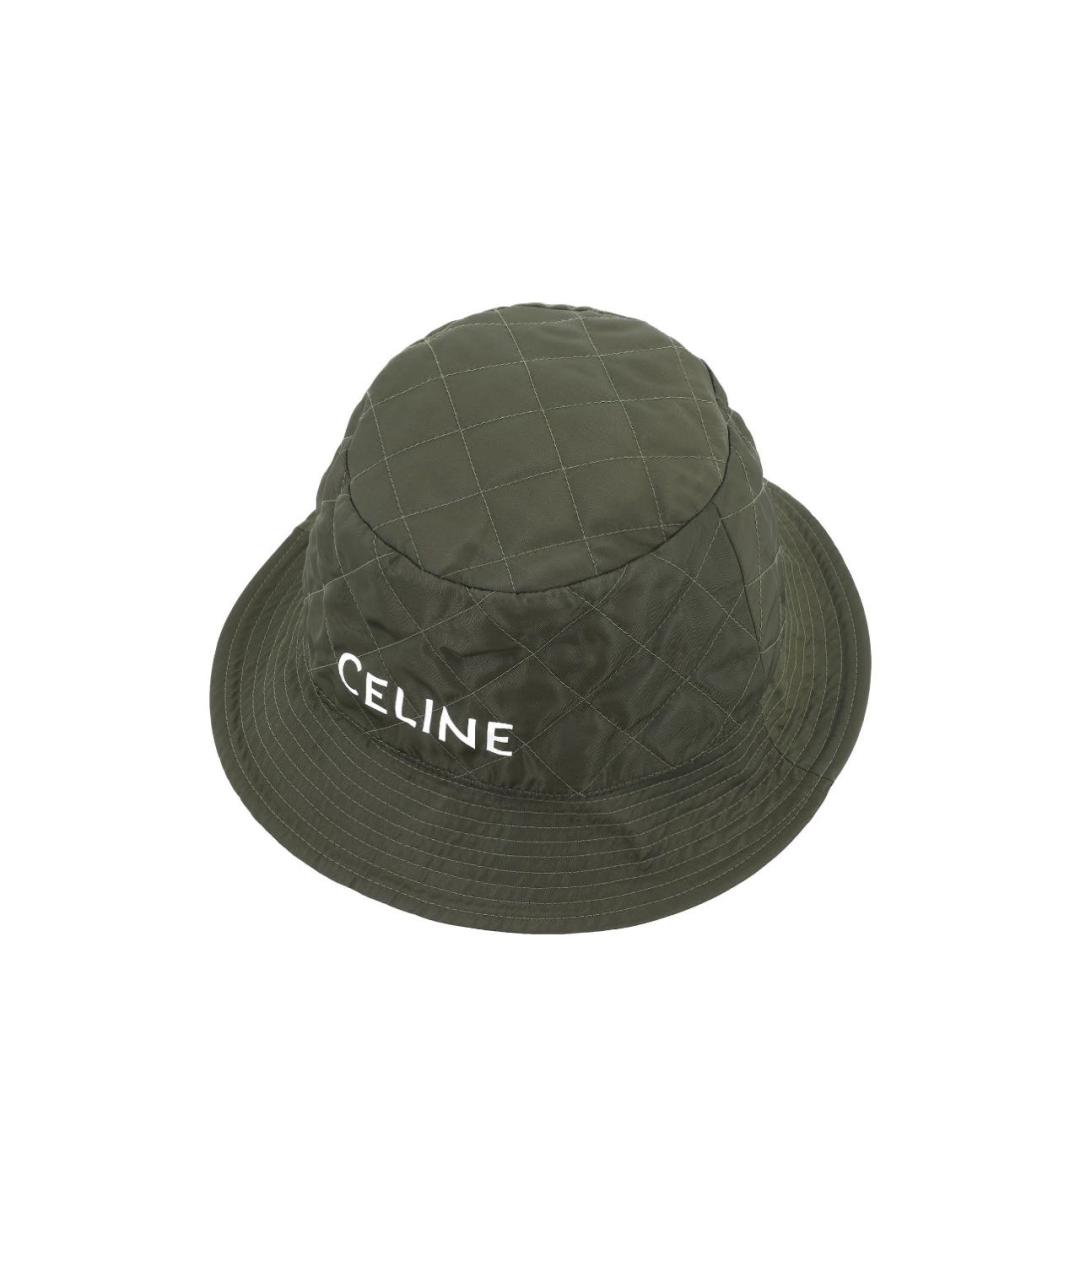 CELINE PRE-OWNED Хаки панама, фото 4